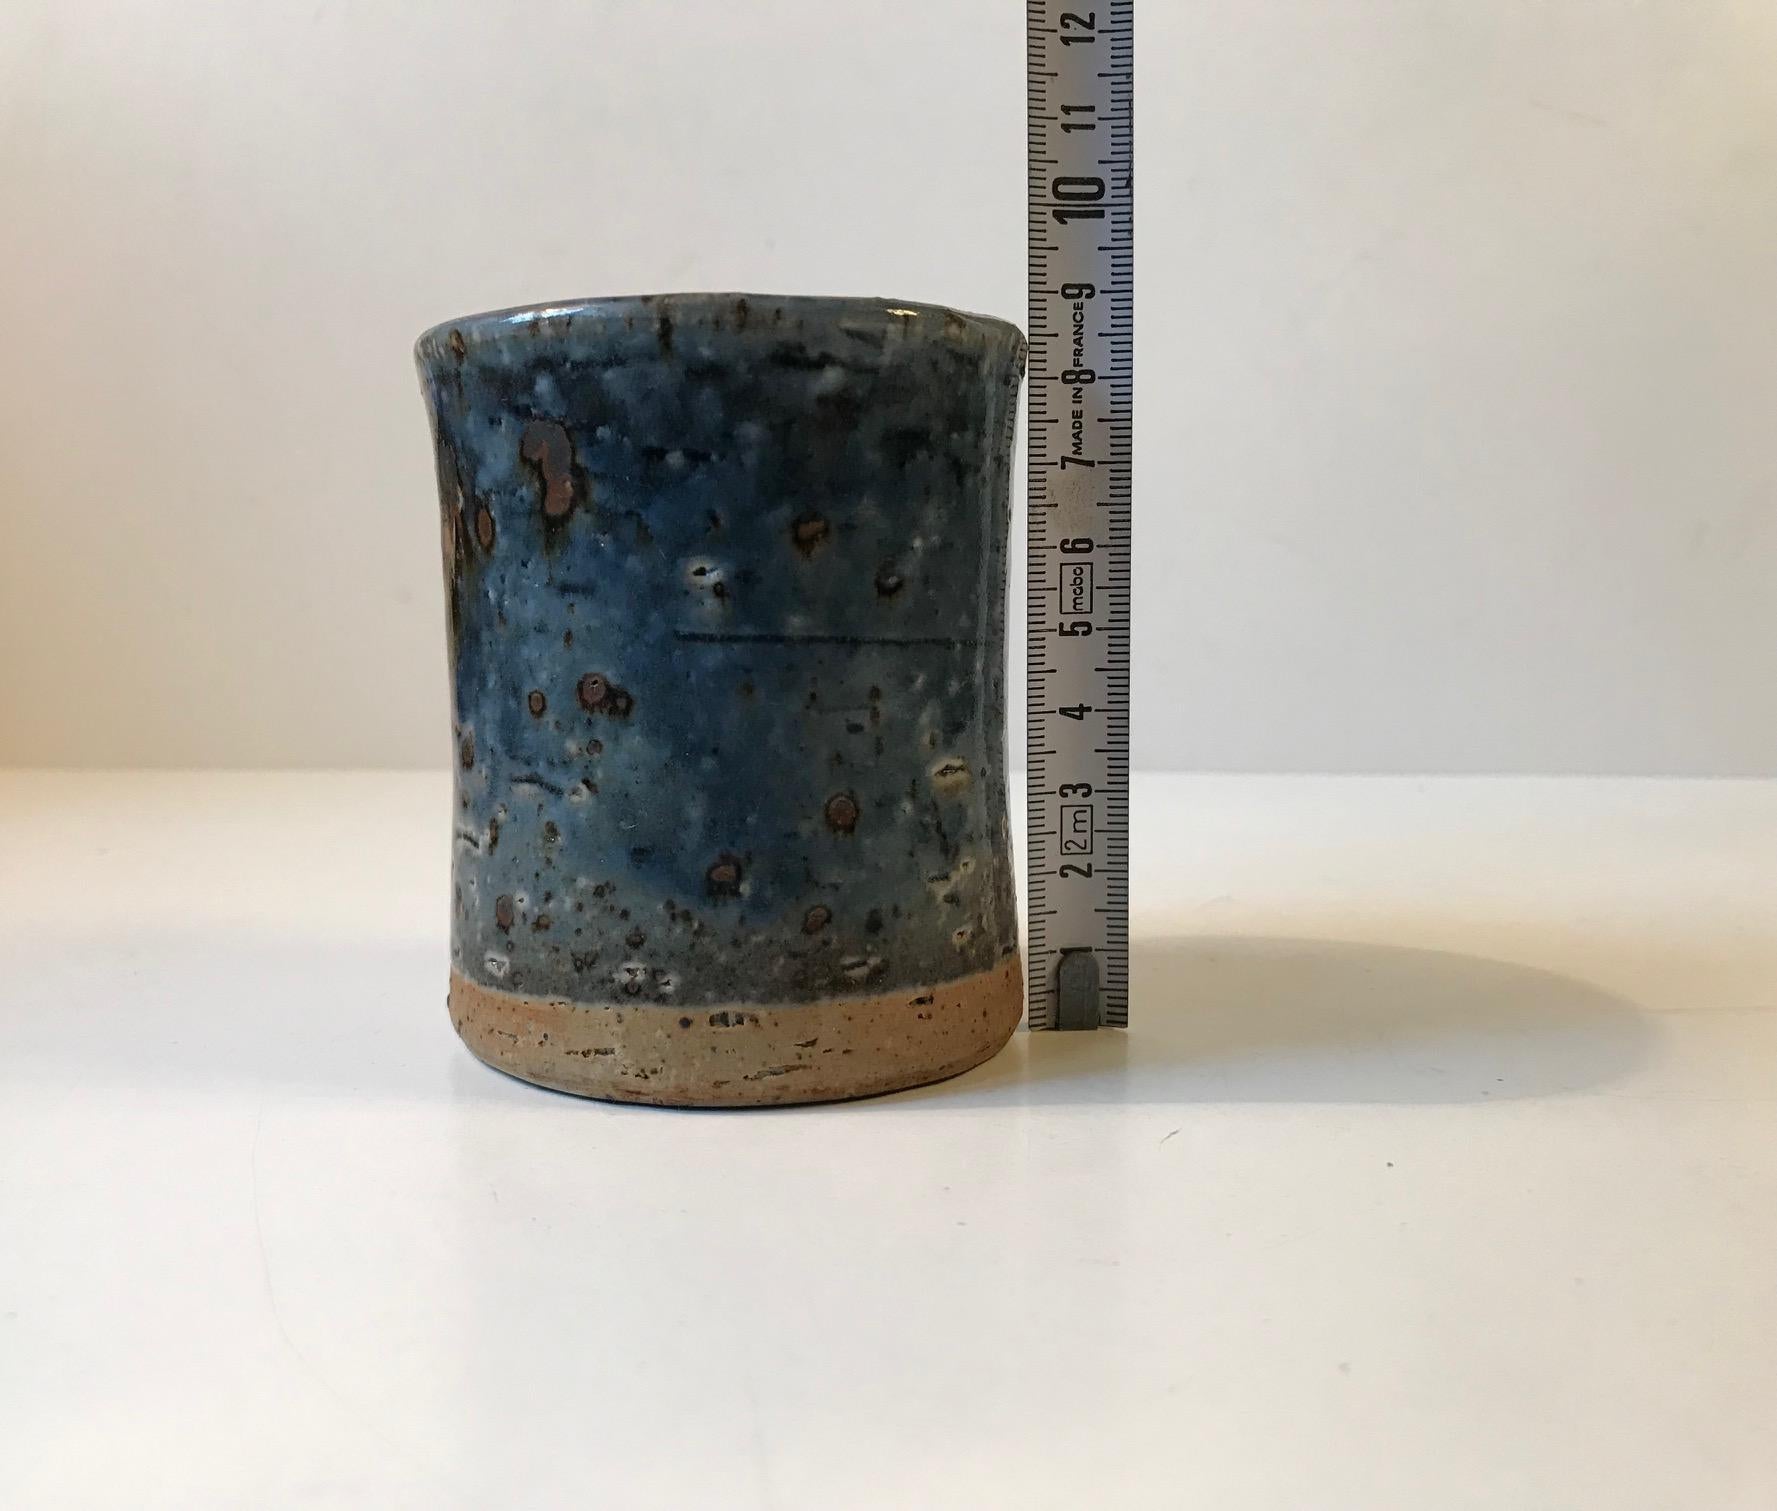 Glazed Stoneware Vase with Blue Glaze by Marianne Westman for Rörstrand, 1960s For Sale